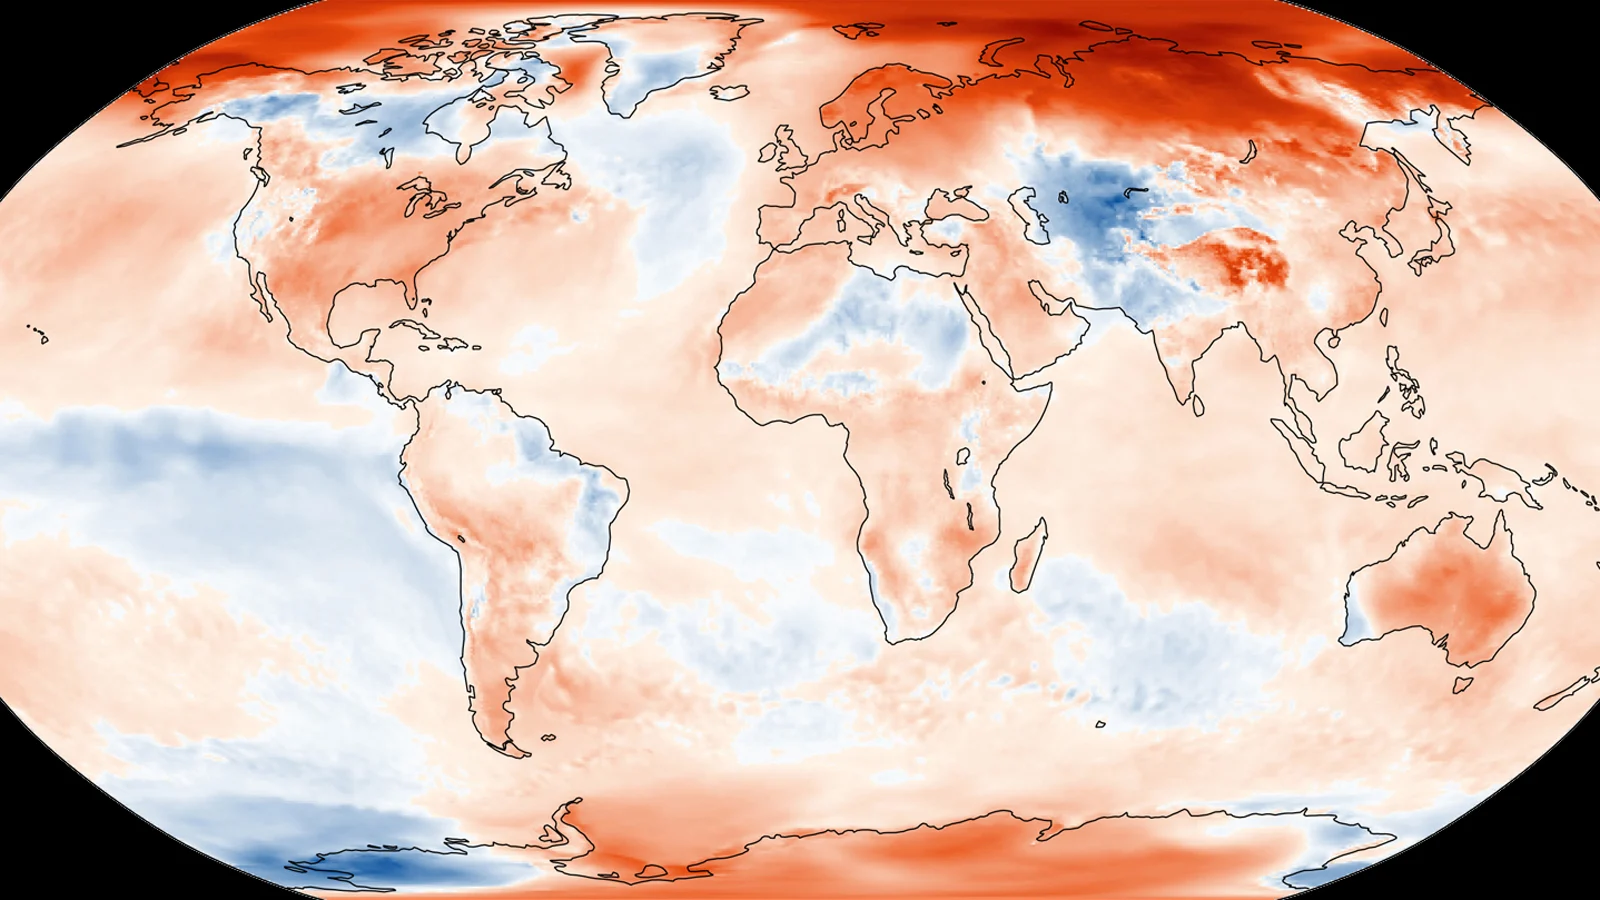 Approaching year’s end, 2020 is now neck-and-neck with 2016 for hottest year